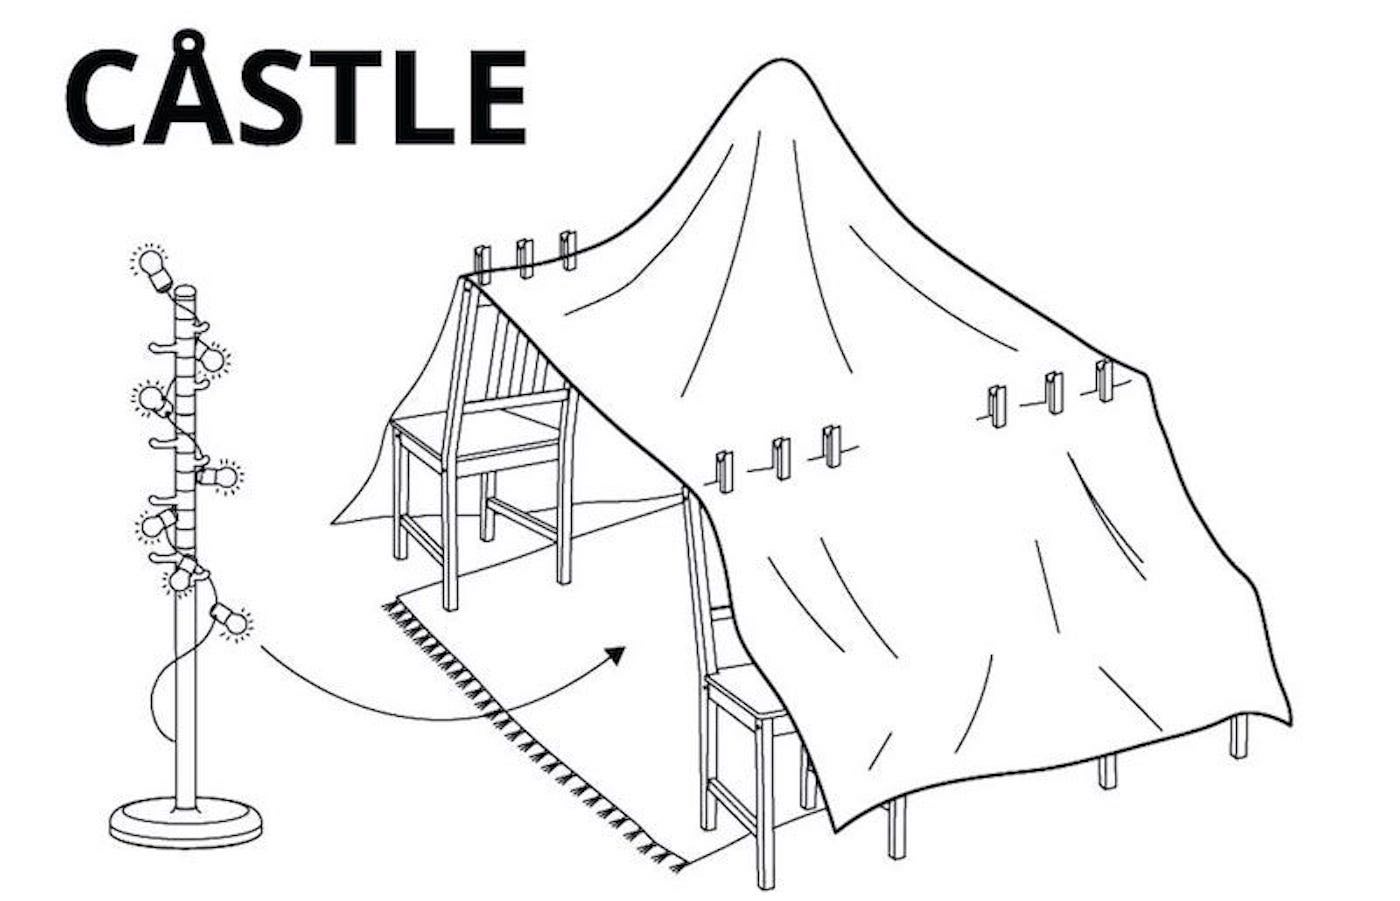 IKEA Released Instructions on How to Build the 6 Best Blanket Forts For  Your Home Quarantine